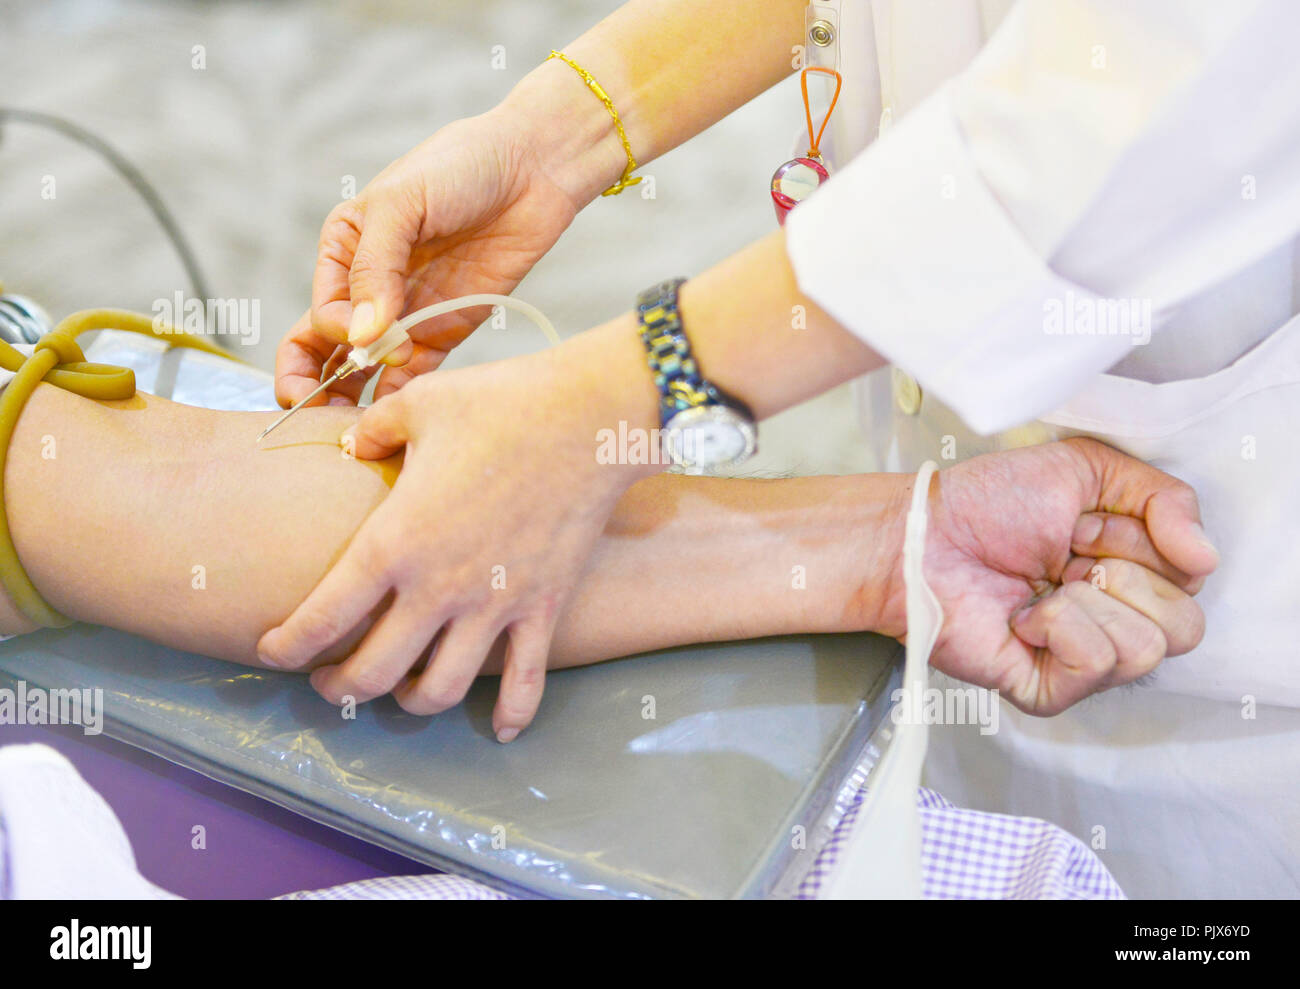 Blood donation, blood transfusion, check specified, fasting, health care in hospital Stock Photo